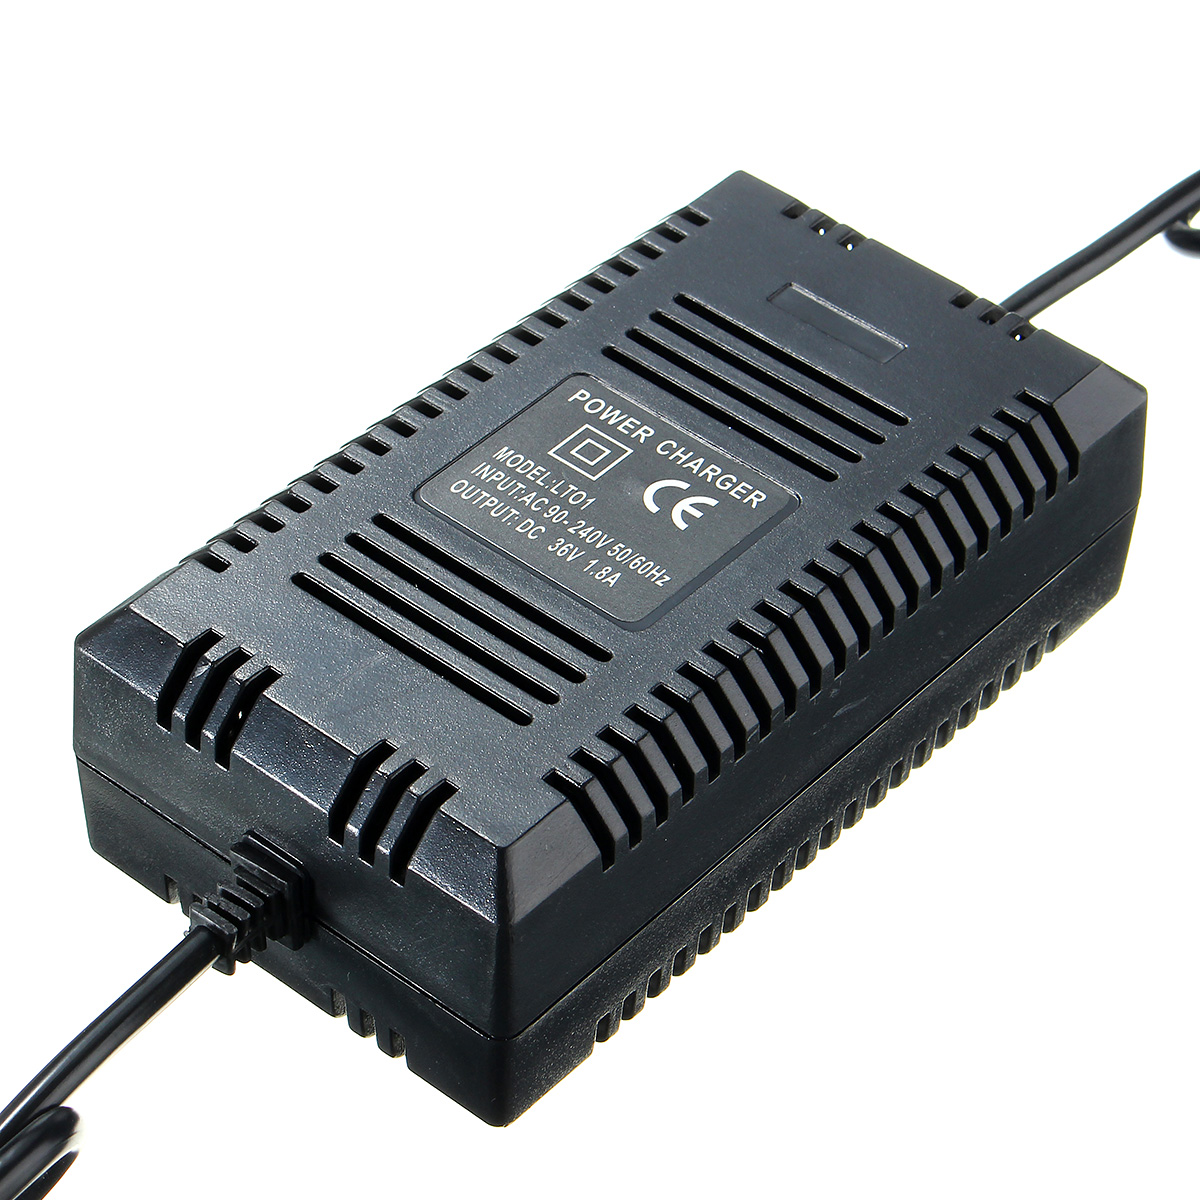 DC 36V 1.6A - 1.8A Amp Battery Charger with Plug for Electric Bike Scooter - Auto GoShop